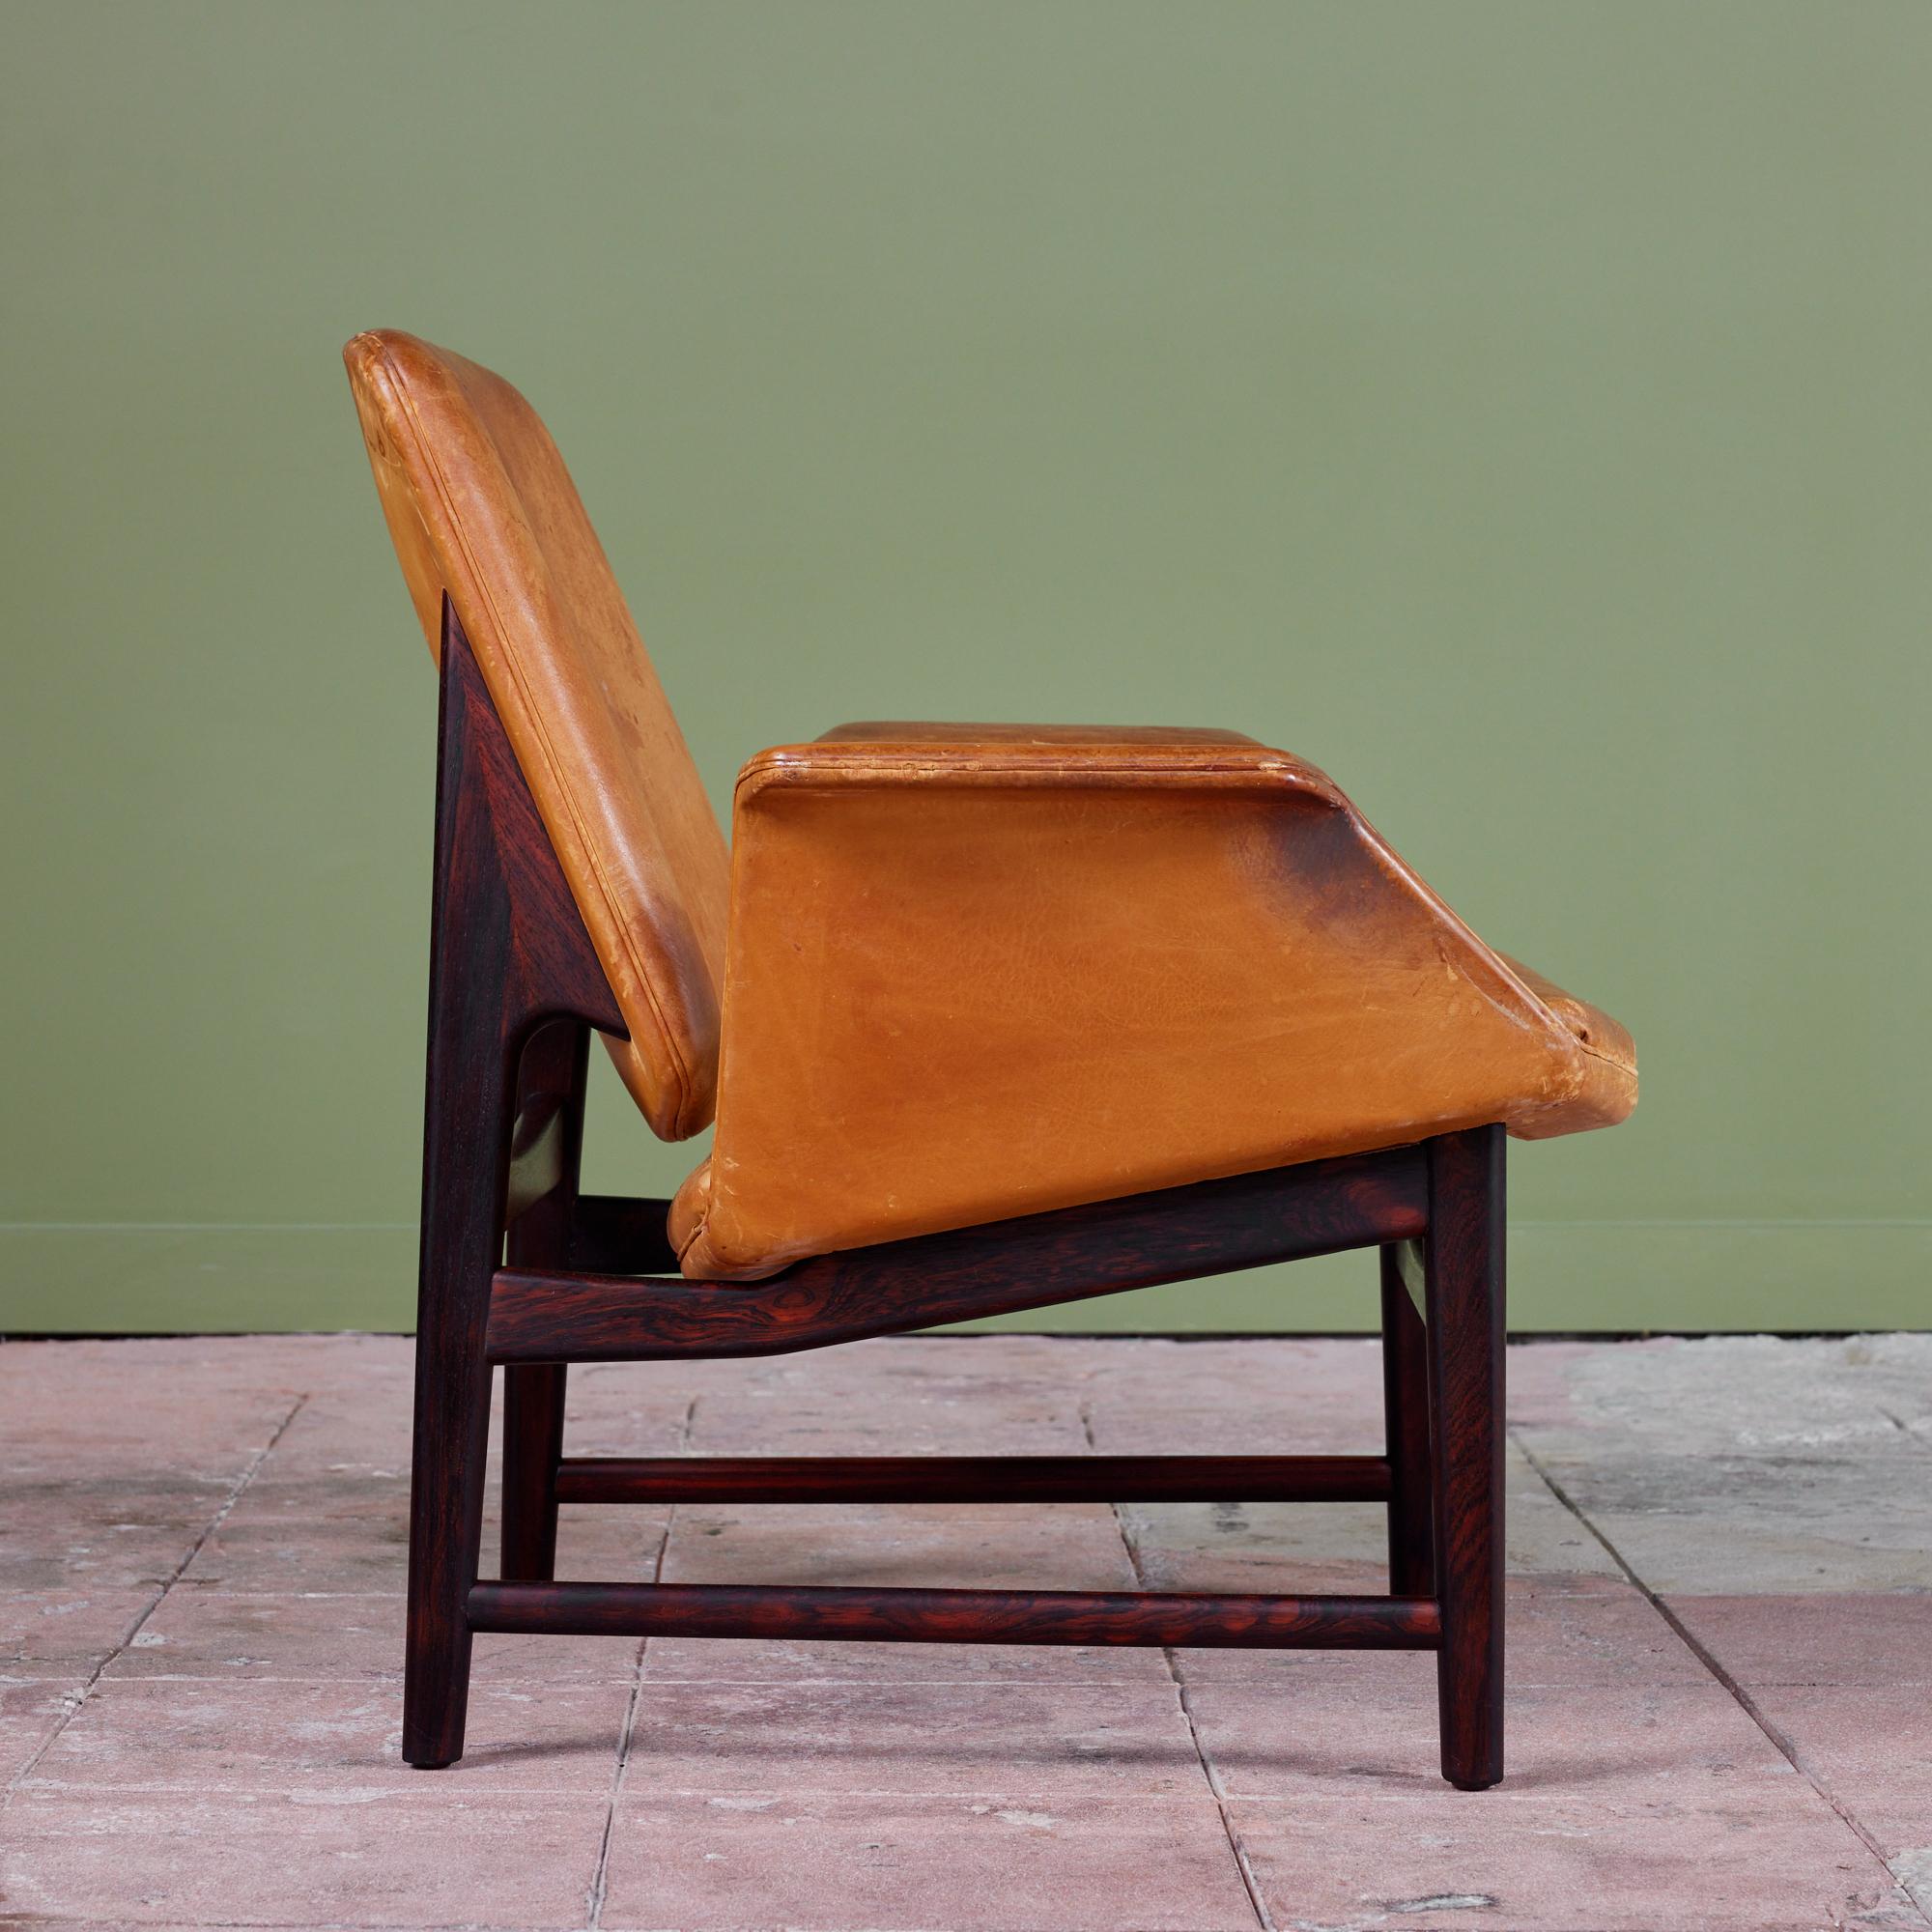 Mid-20th Century Illum Wikkelsø Leather Lounge Chair for Aarhus For Sale